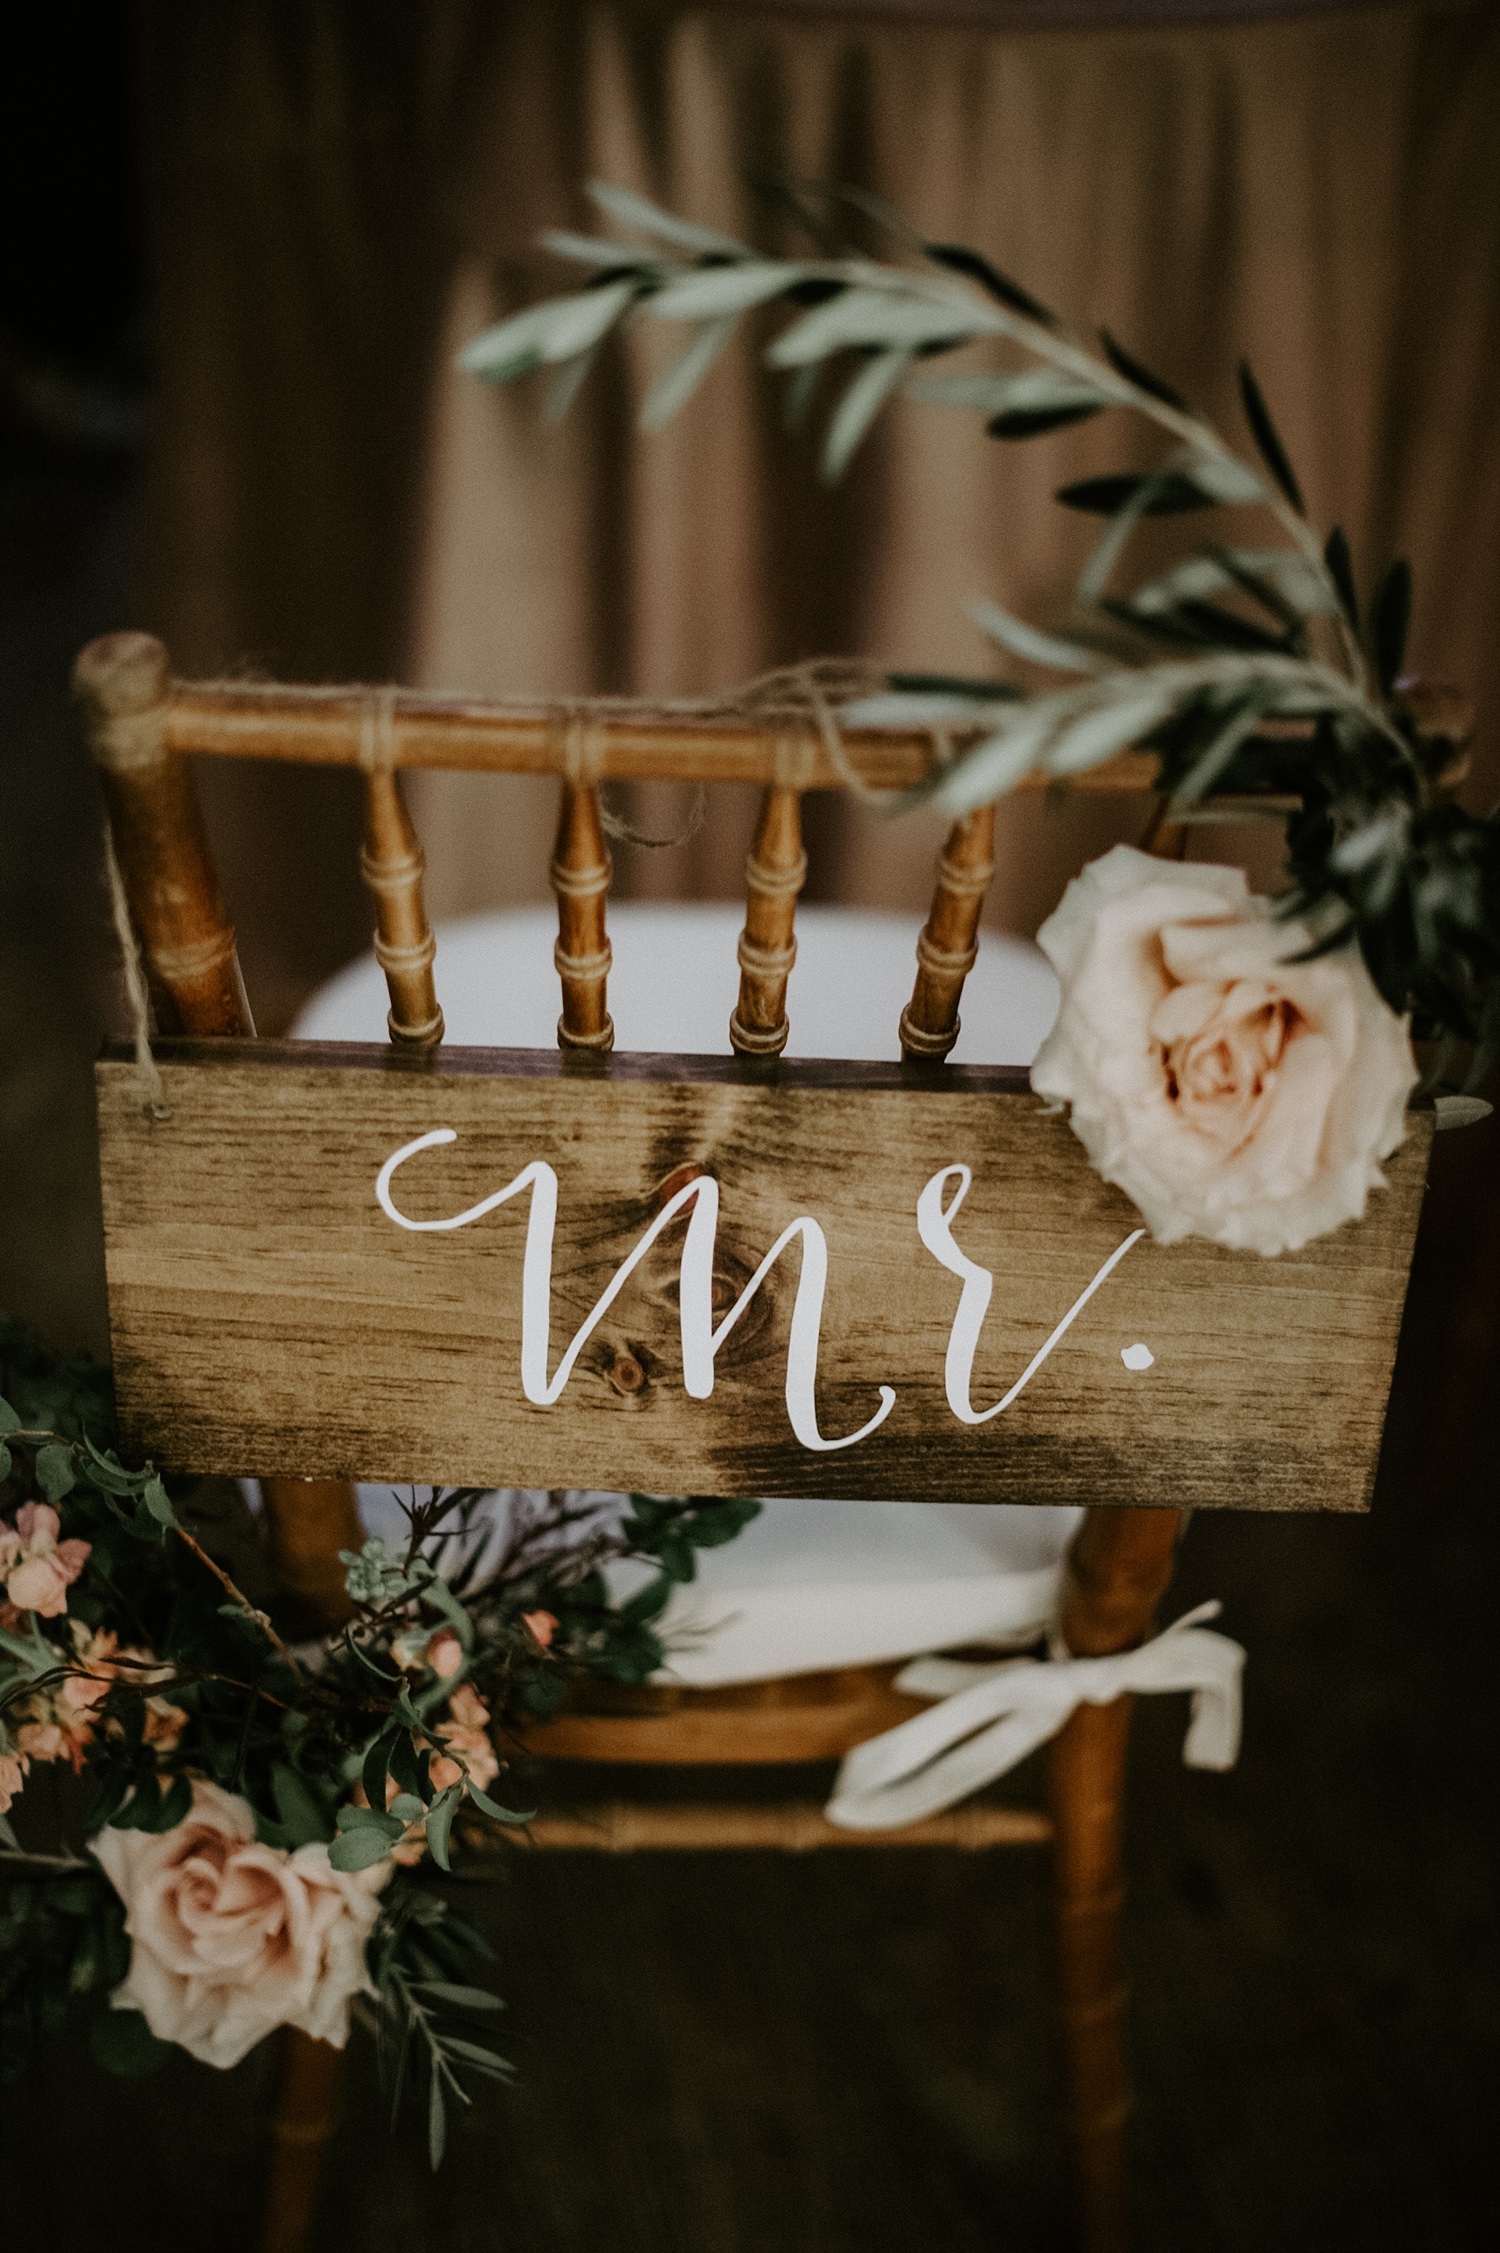 Mr. & Mrs Rustic wooden chair signs at The Webb Barn in Wethersfield, CT